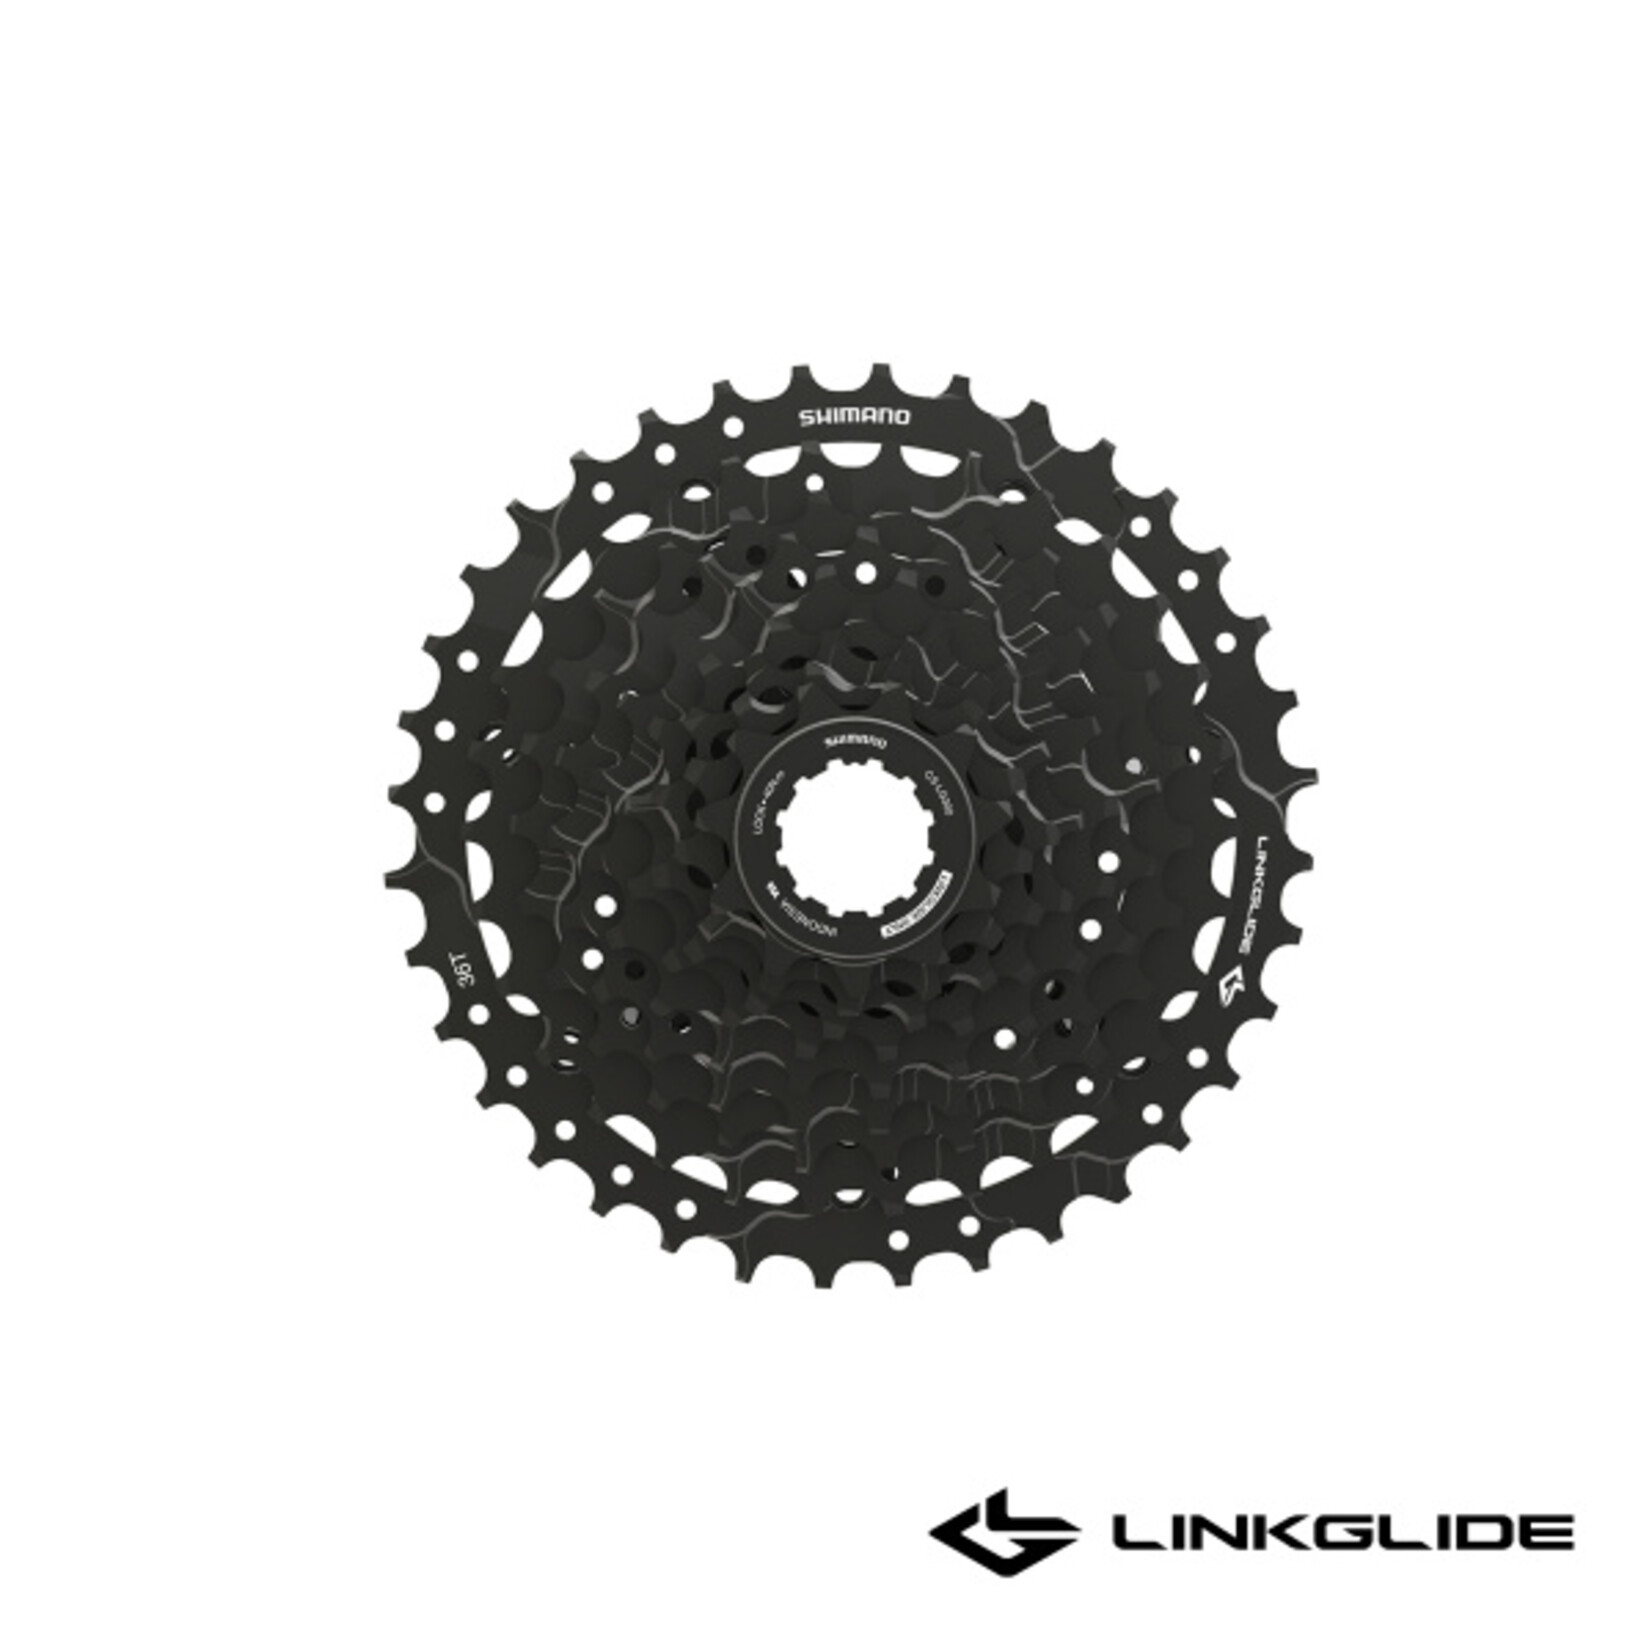 Shimano Shimano CS-LG300 Cassette 11-36 Cues 9-Speed *Linkglide Only